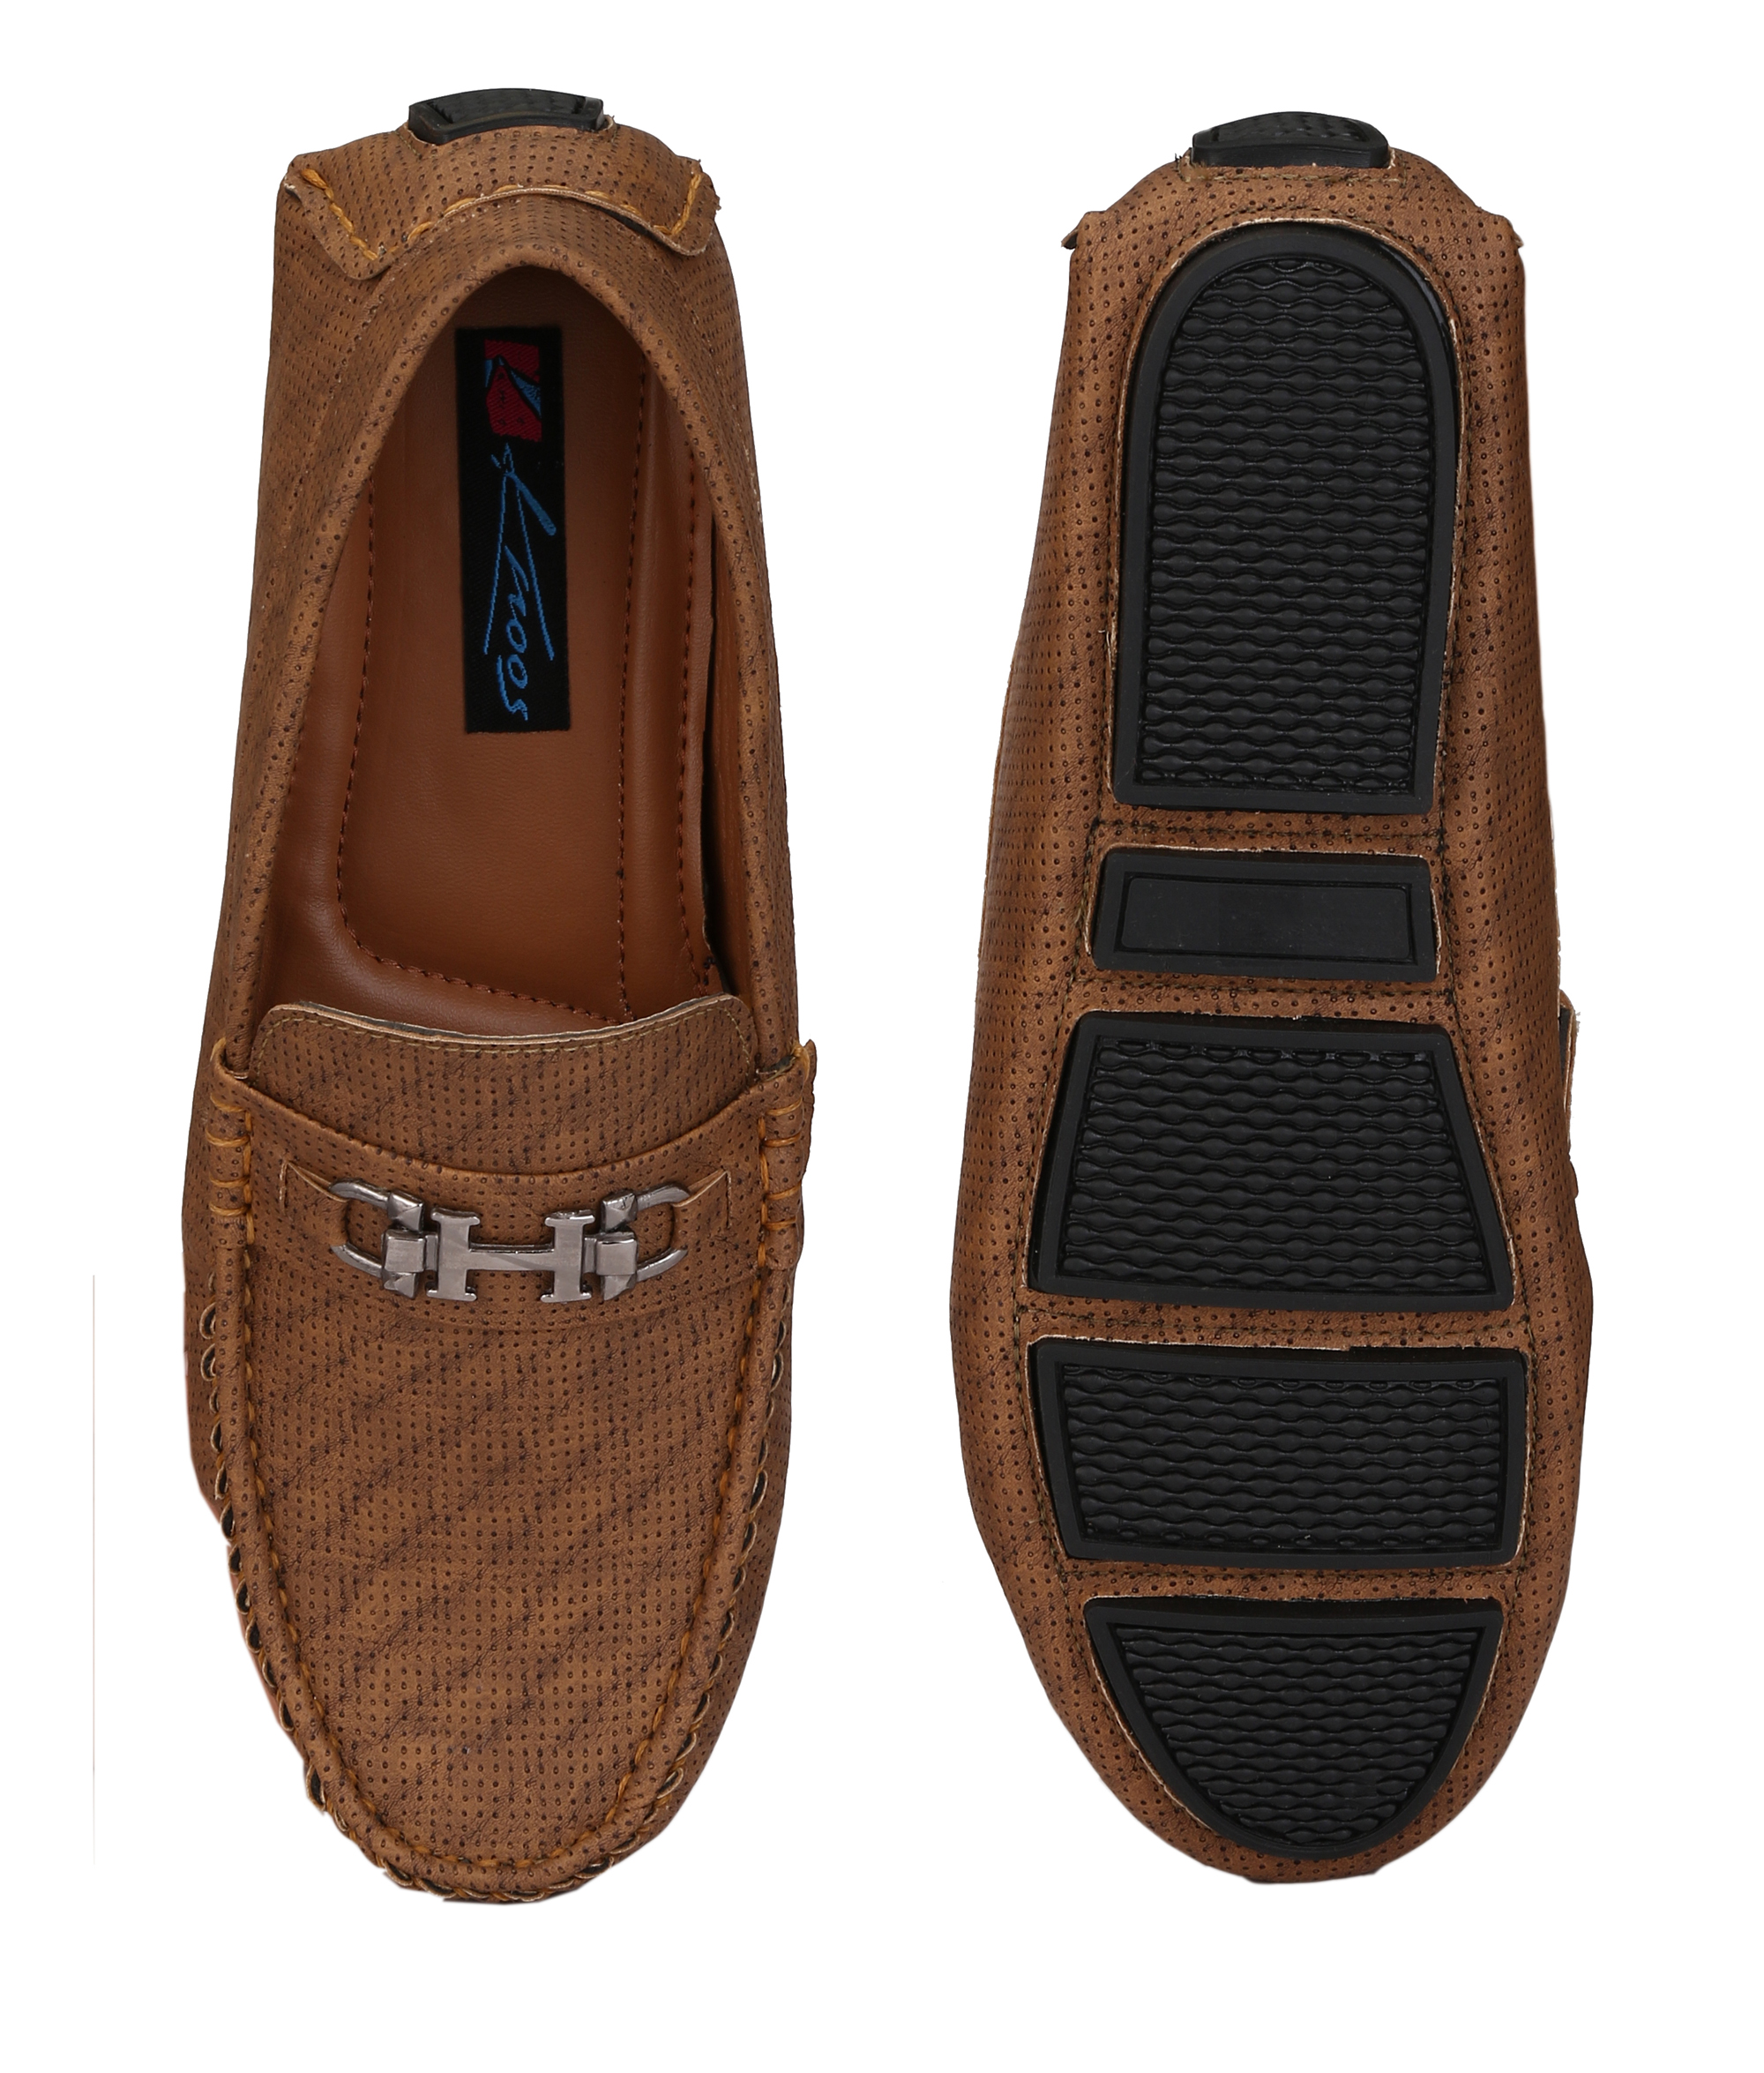 Buy Knoos Tan Men Driving Shoes Online @ ₹629 from ShopClues